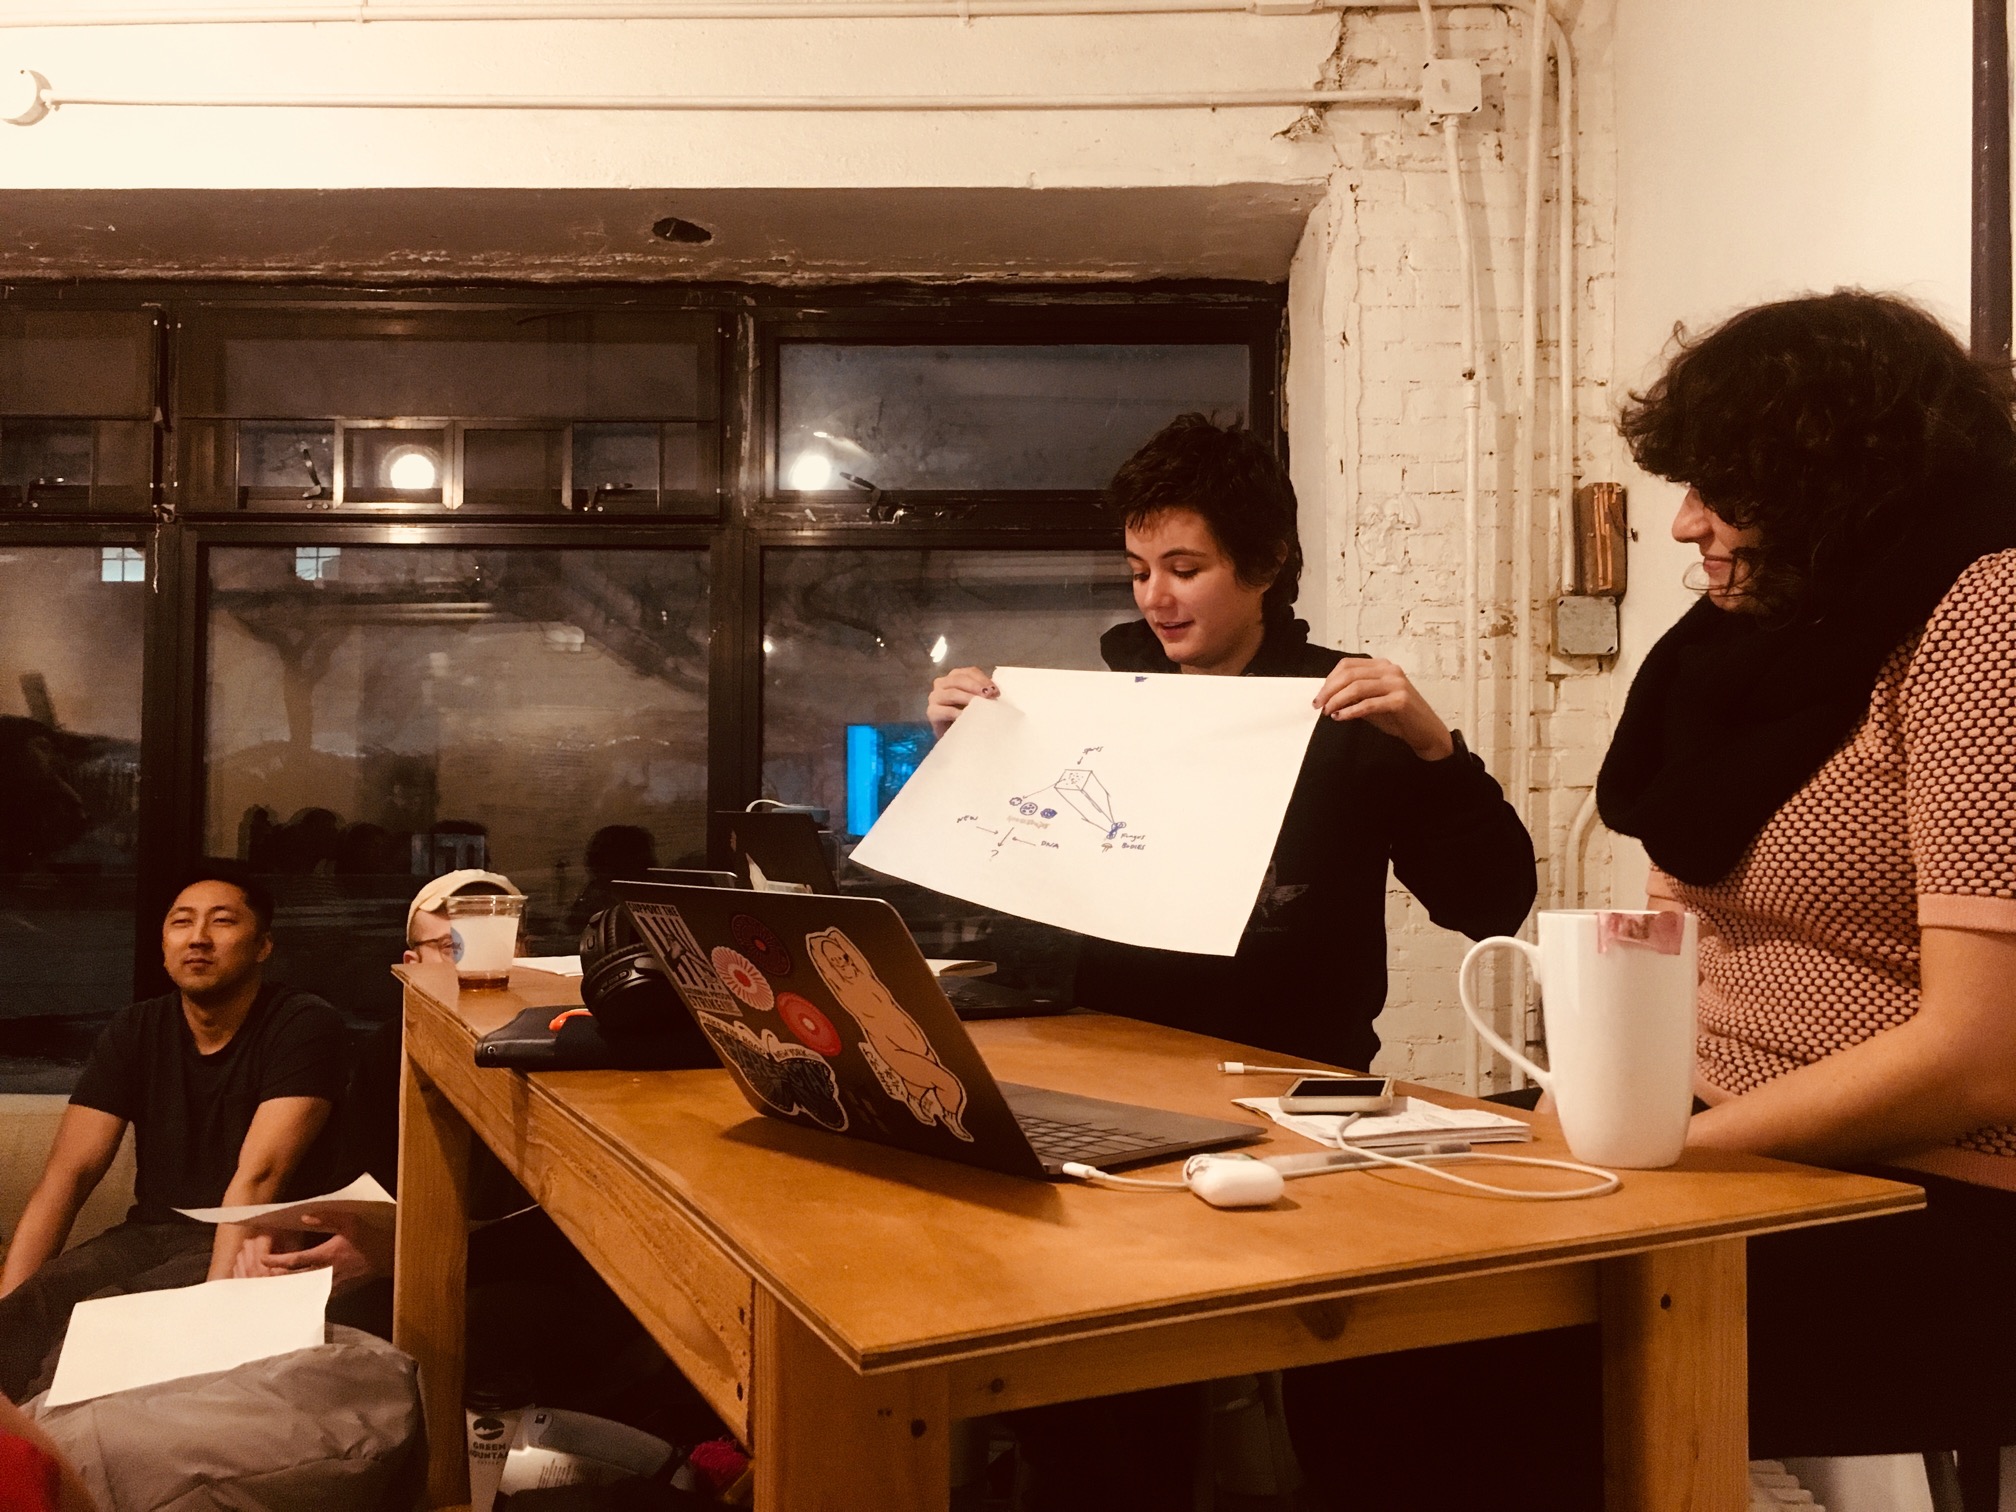 "AC Gilette presenting a collaborative drawing done with Nadja Oertelt."